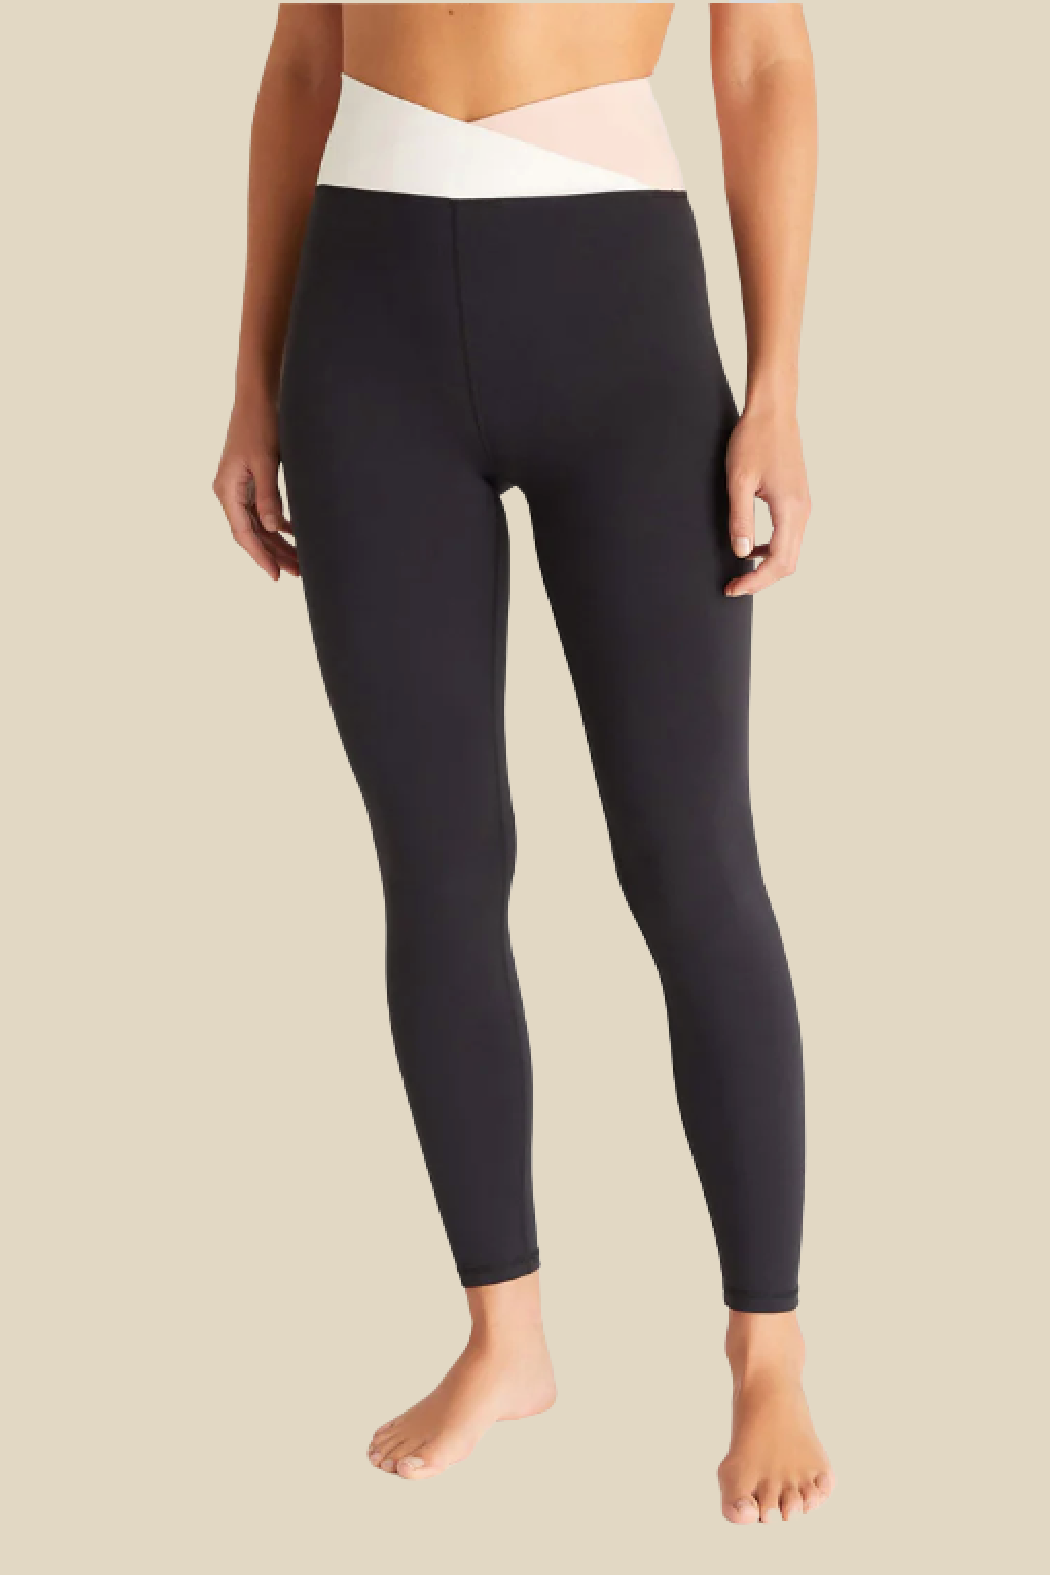 Aerie Chill Play Move Leggings High Rise Activewear